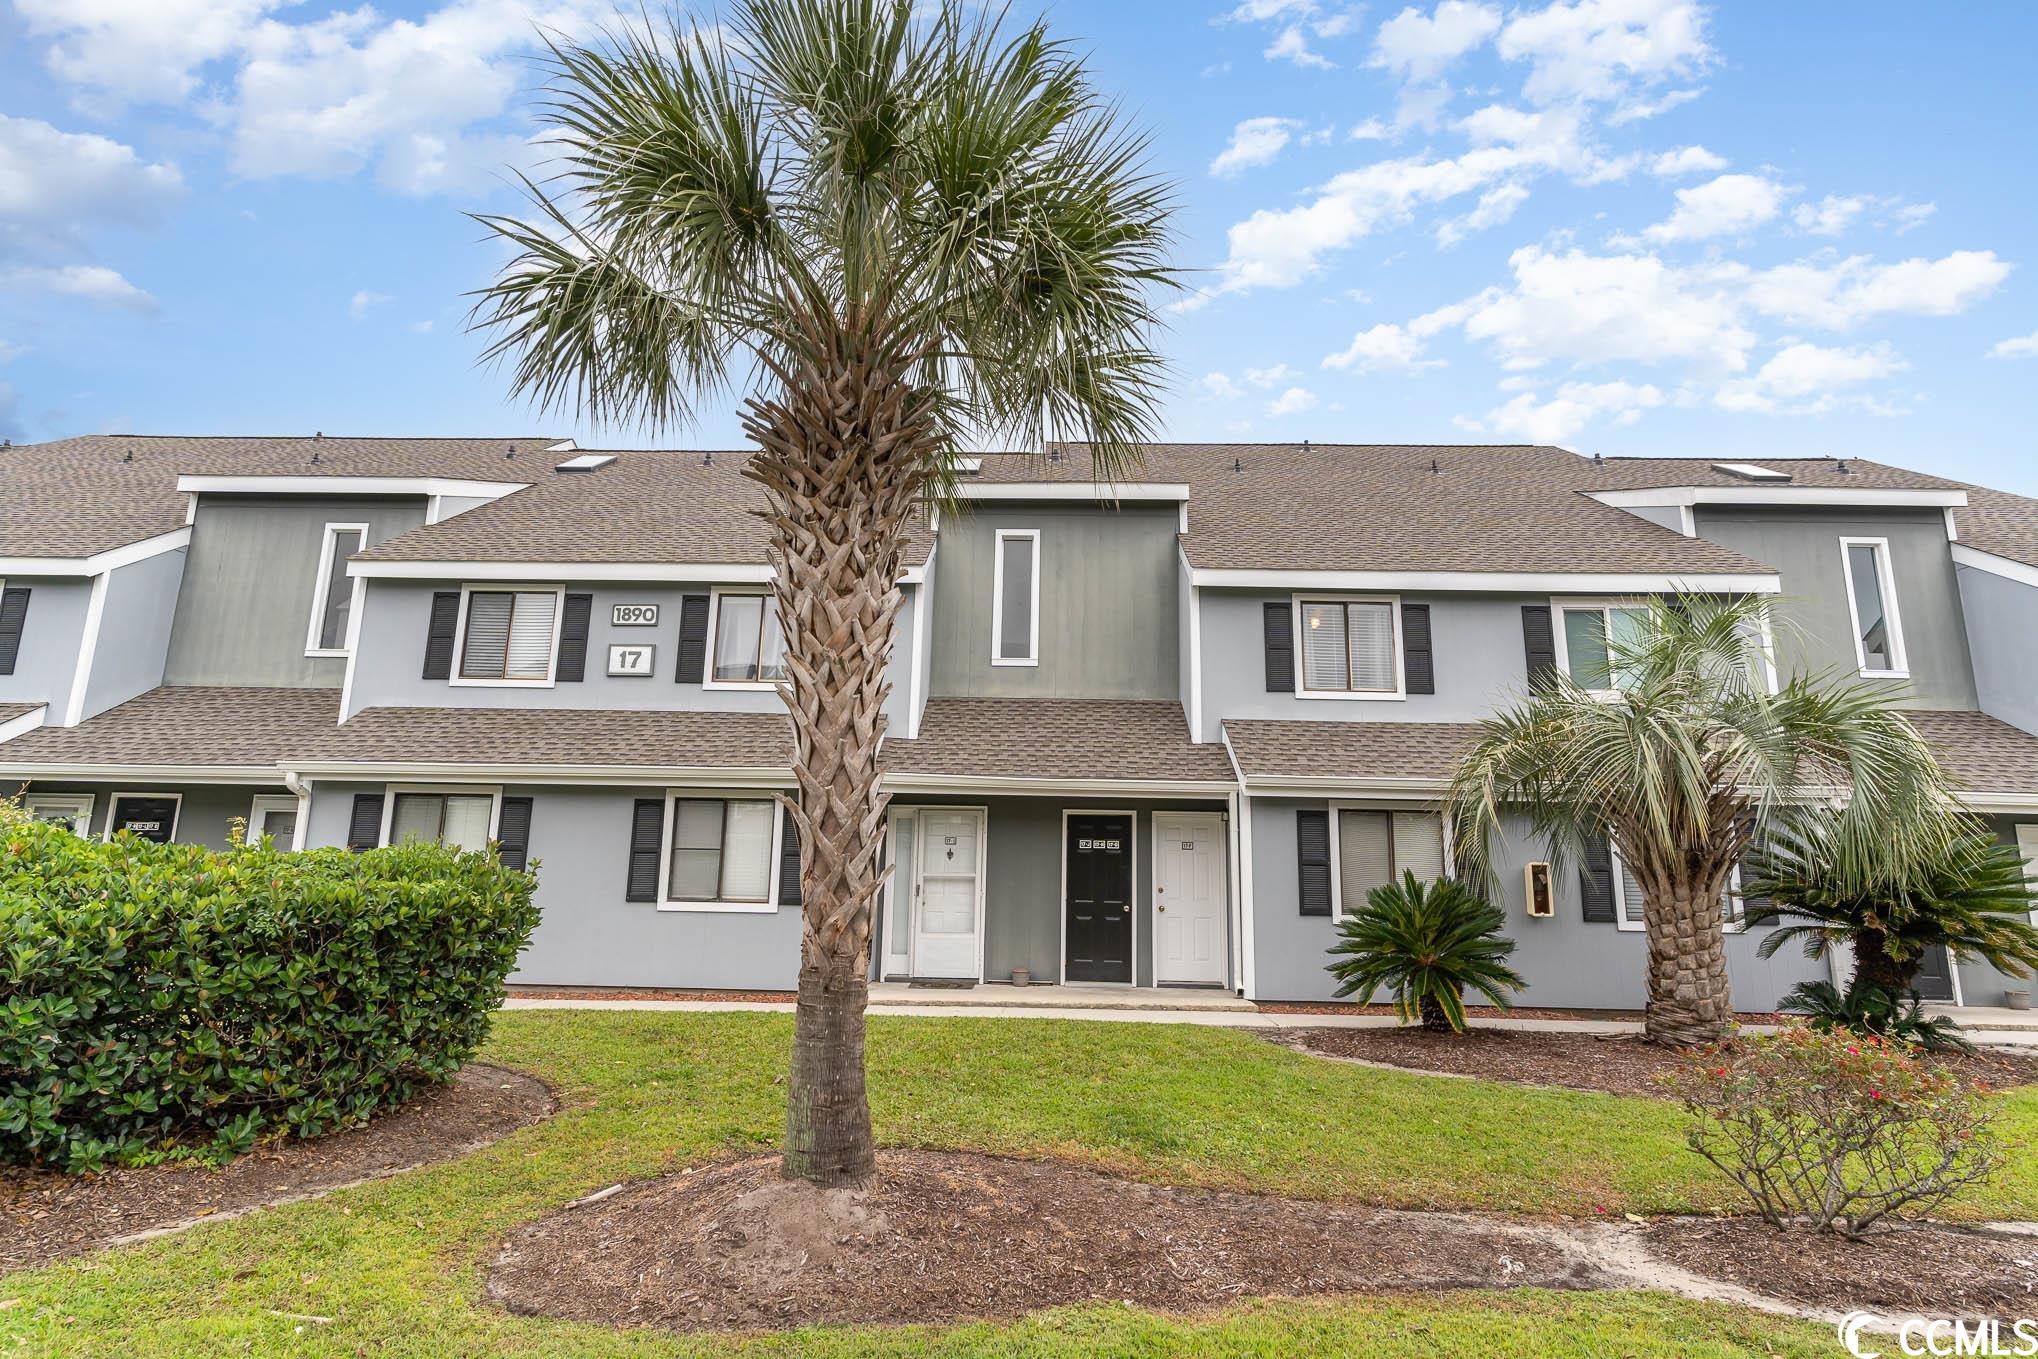 large second floor unit overlooking the pool. granite counter tops, stainless steel appliances and vaulted ceilings. tennis courts, pool, jacuzzi, conveniently located near shopping and airport. buyer to verify all measurements and hoa information.